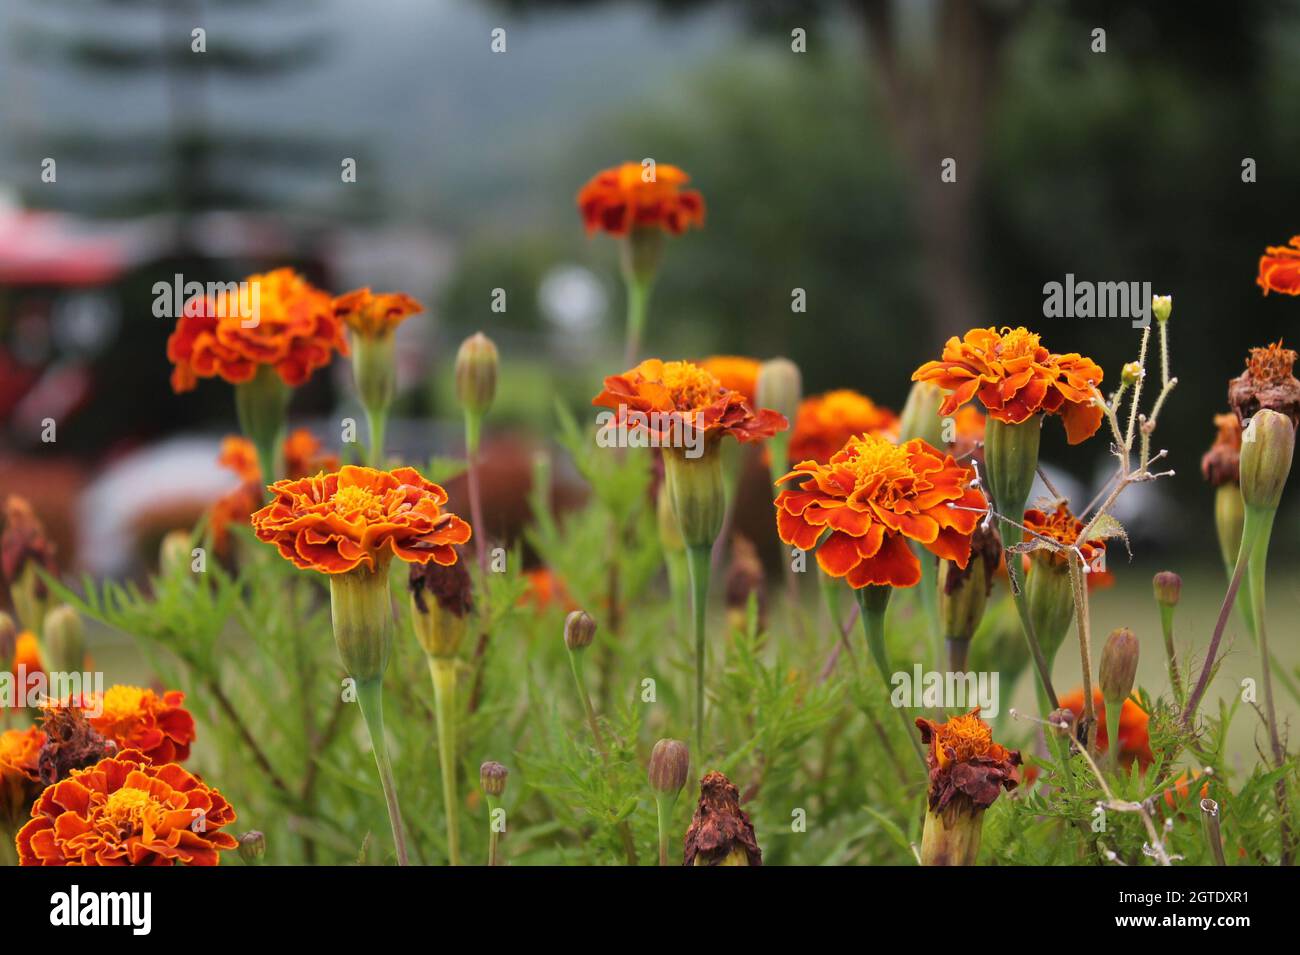 Orange Paper Flowers In Semarang Park, Beautiful Little Things Hanging From Our Point Of View. Stock Photo